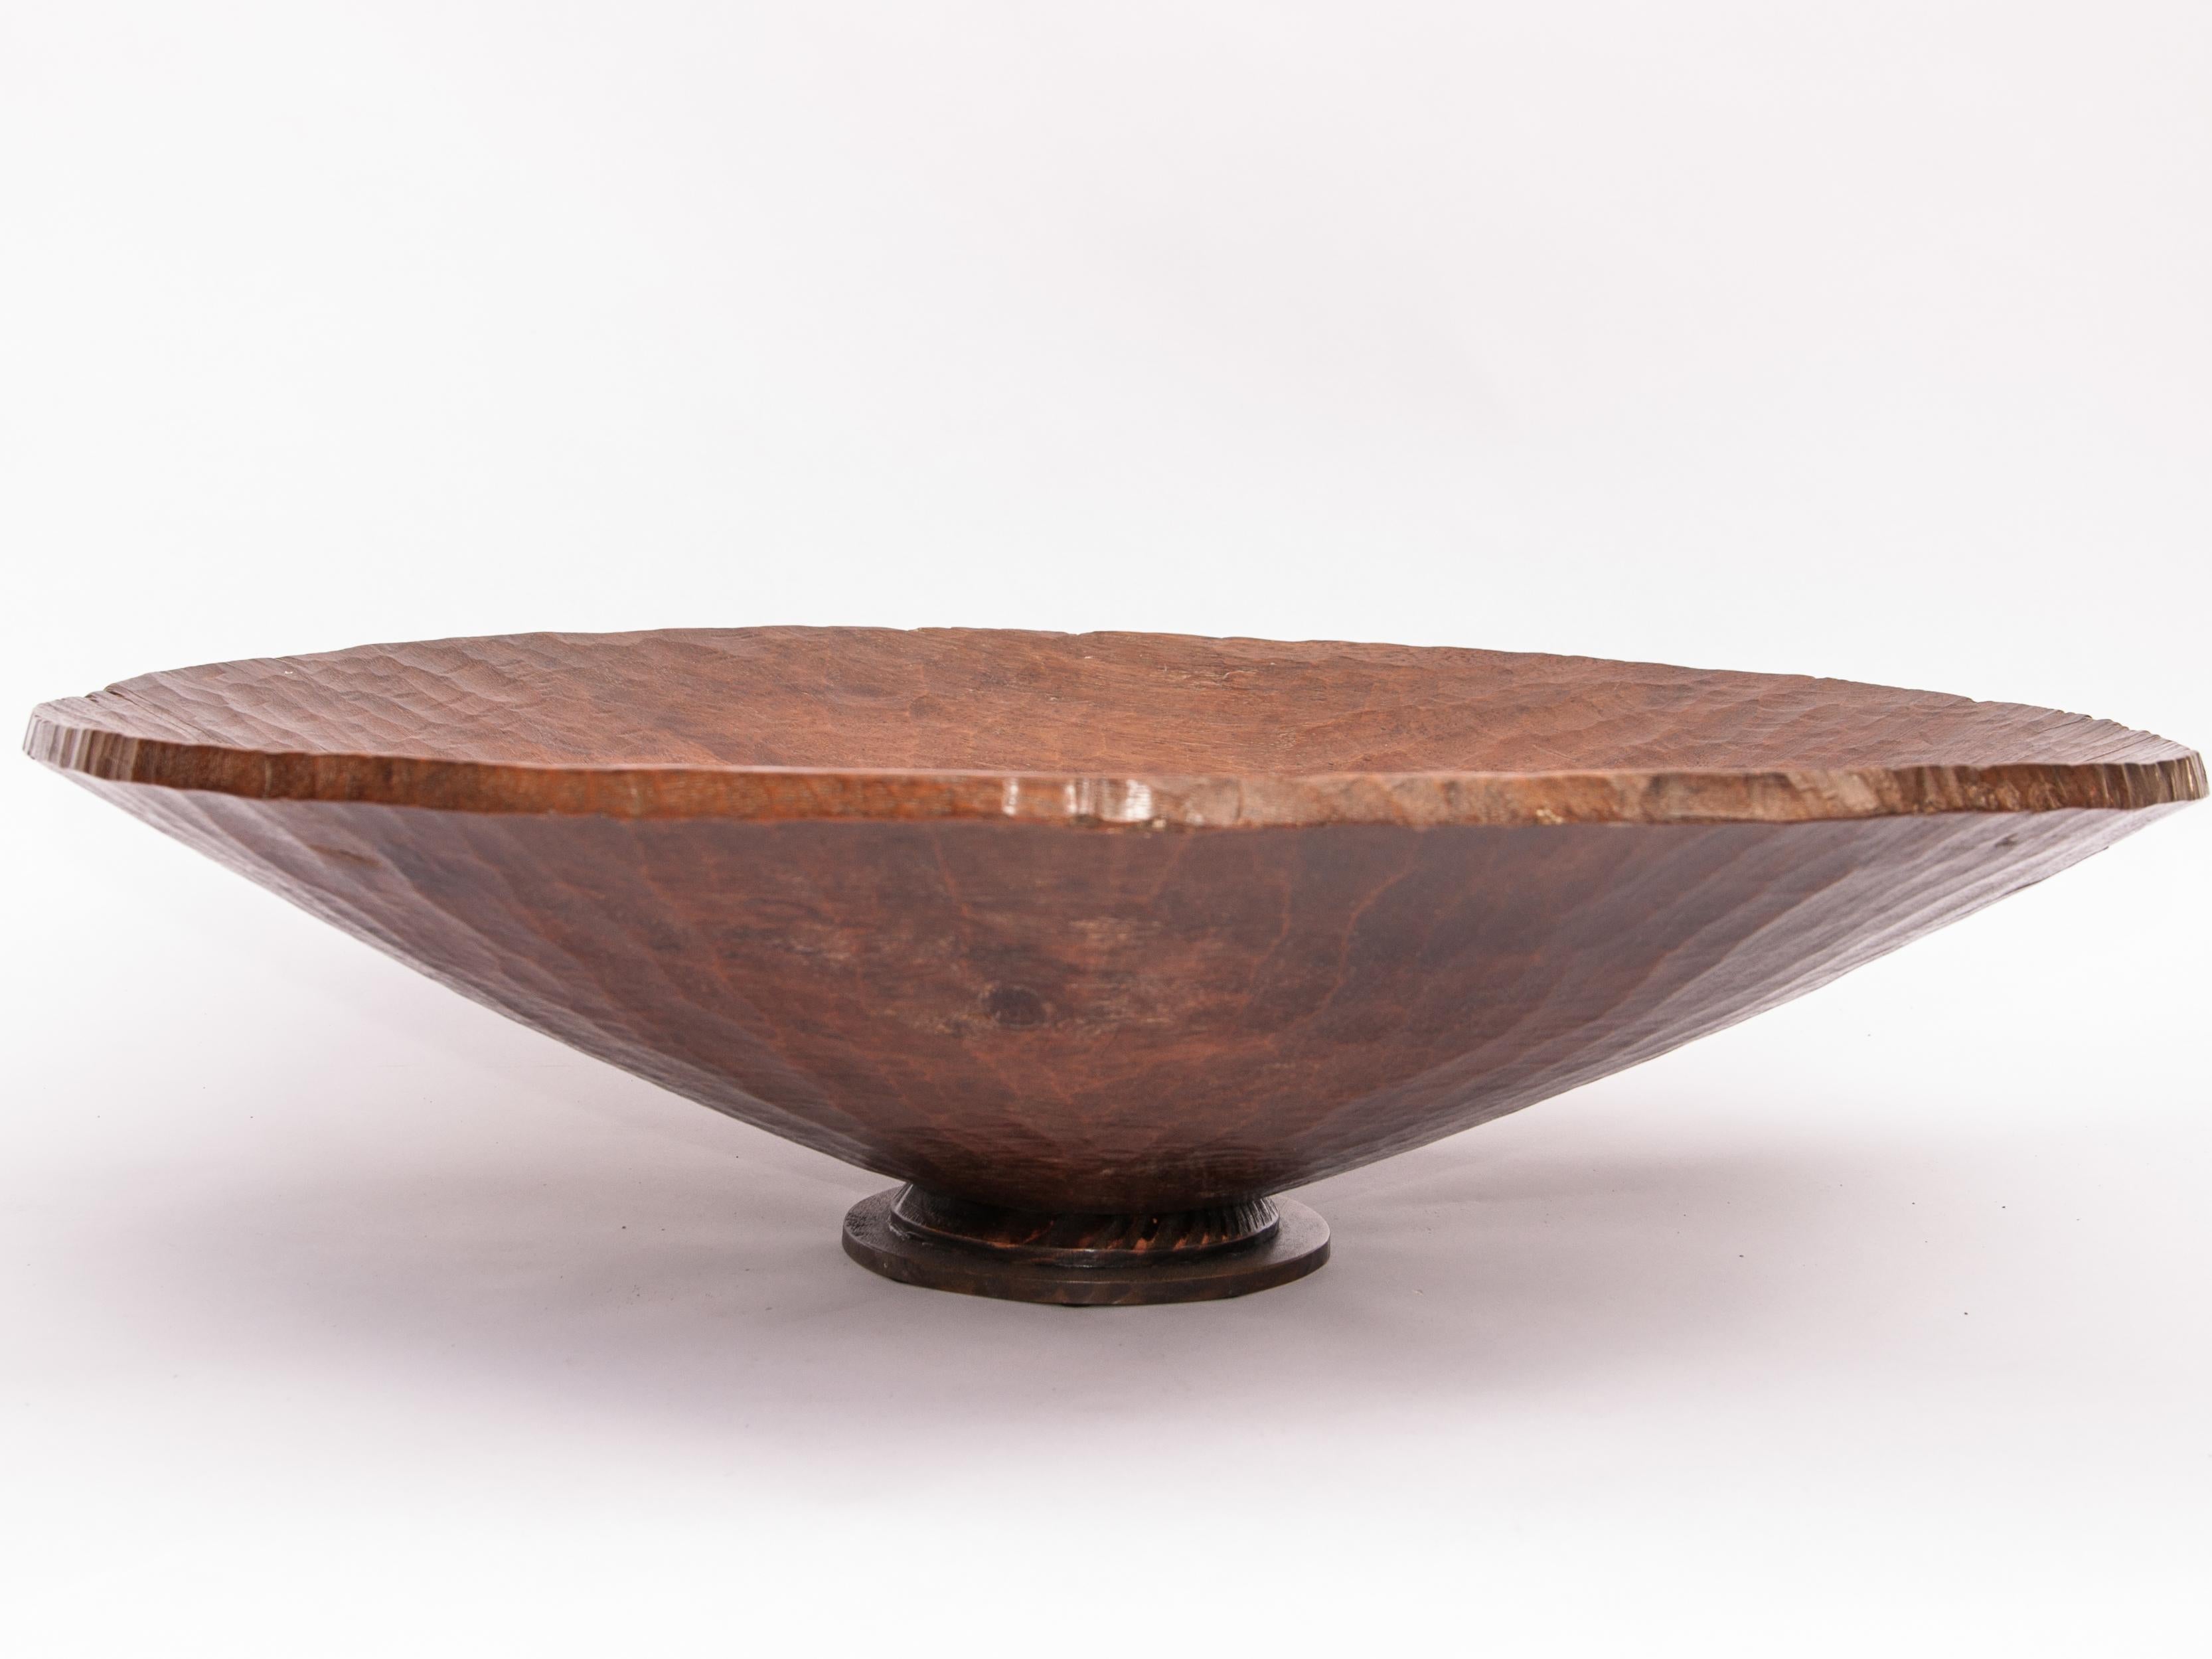 Hand-Crafted Vintage Gold Panning Tray / Bowl, Footed, NE Thailand, Mid-20th Century